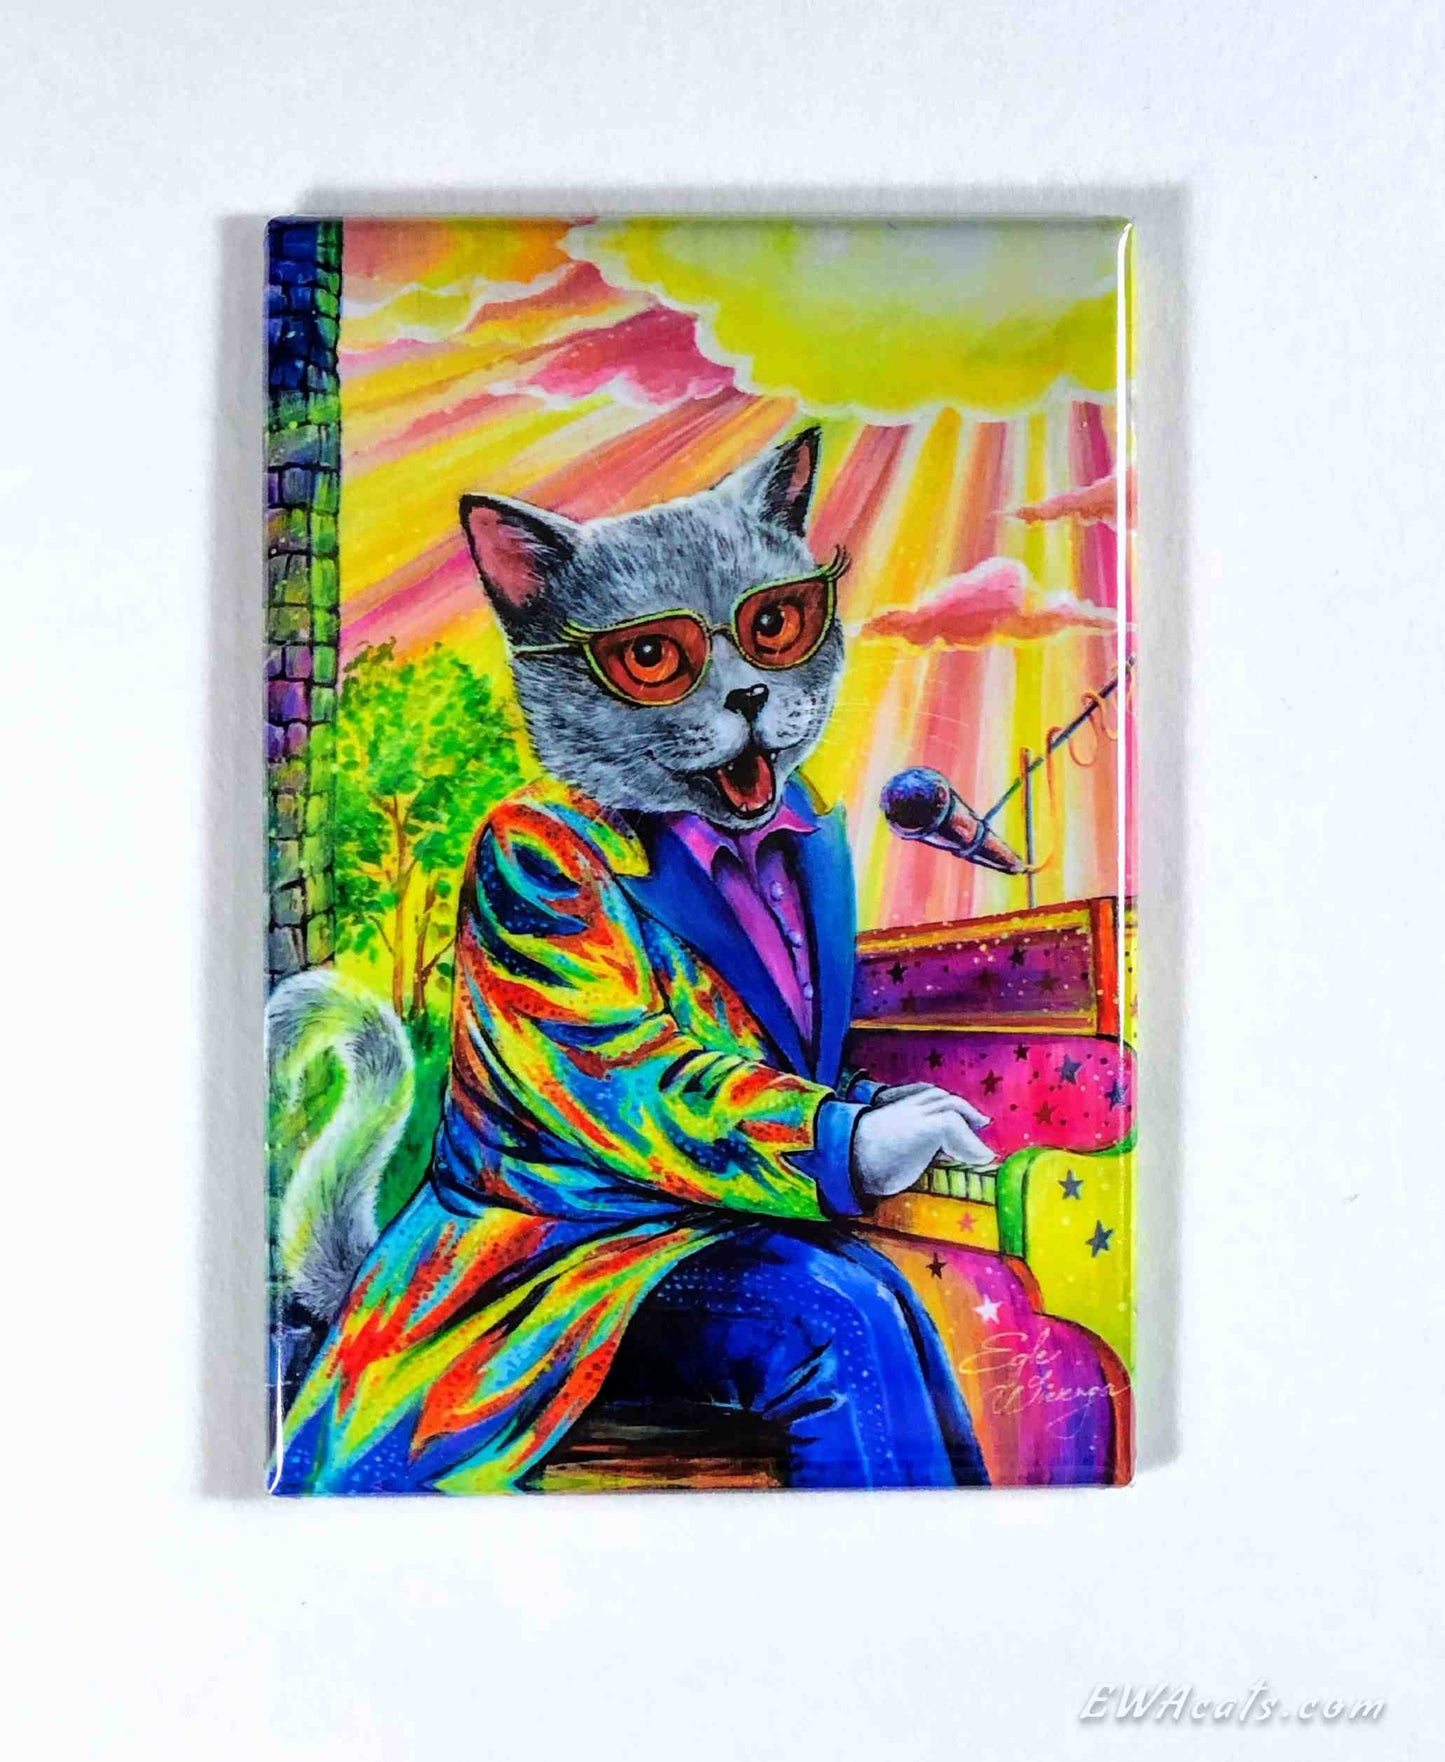 MAGNET 2"x 3" Rectangle "I'm Still Meowing"